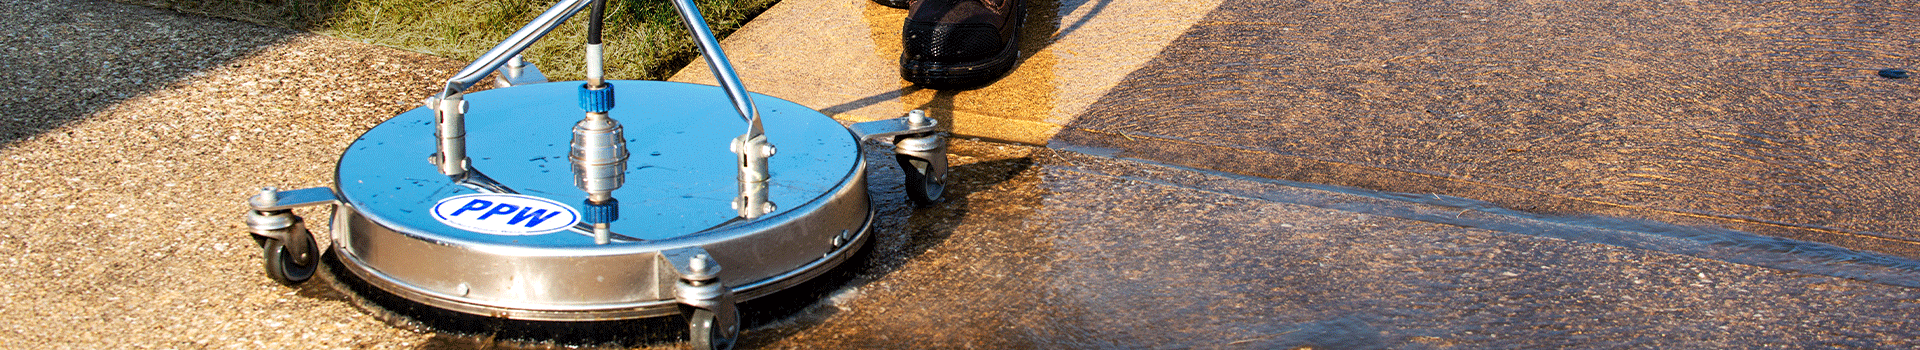 A surface cleaner with a PPW sticker cleaning a concrete driveway, showing a before and after effect